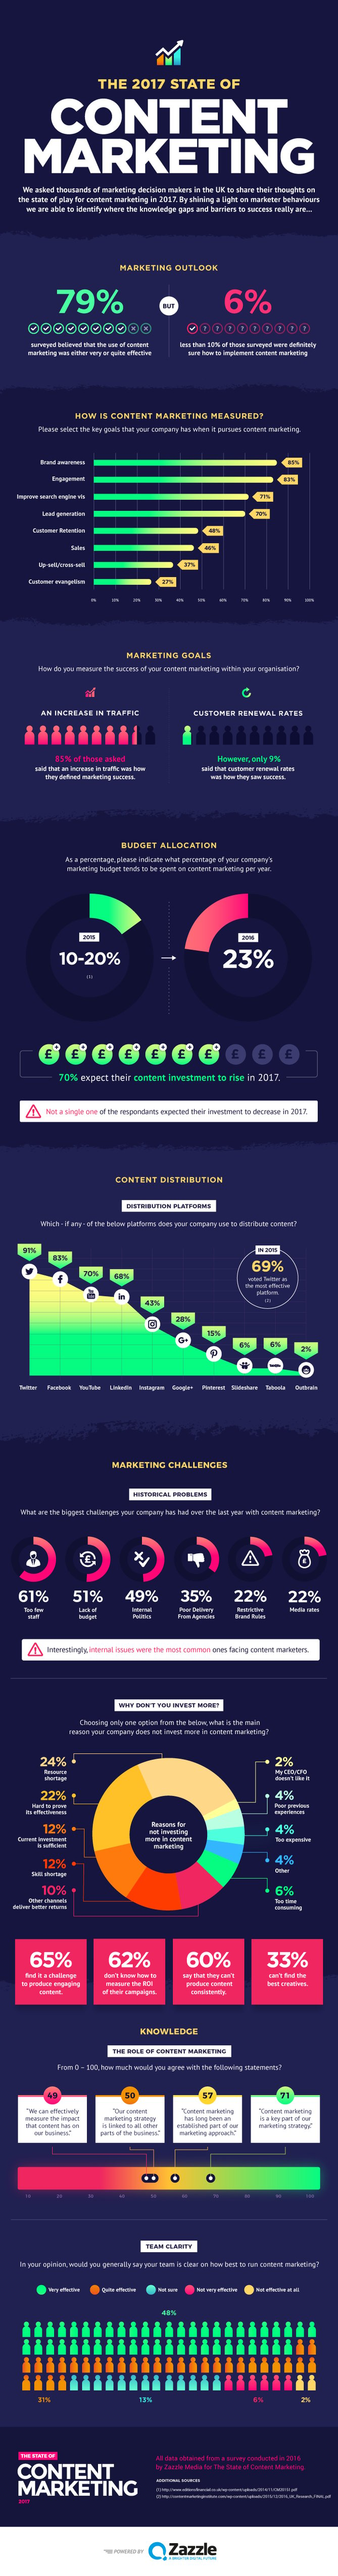 HUBSPOT-IG-STATE_OF_CONTENT_MARKETING_SURVEY.png